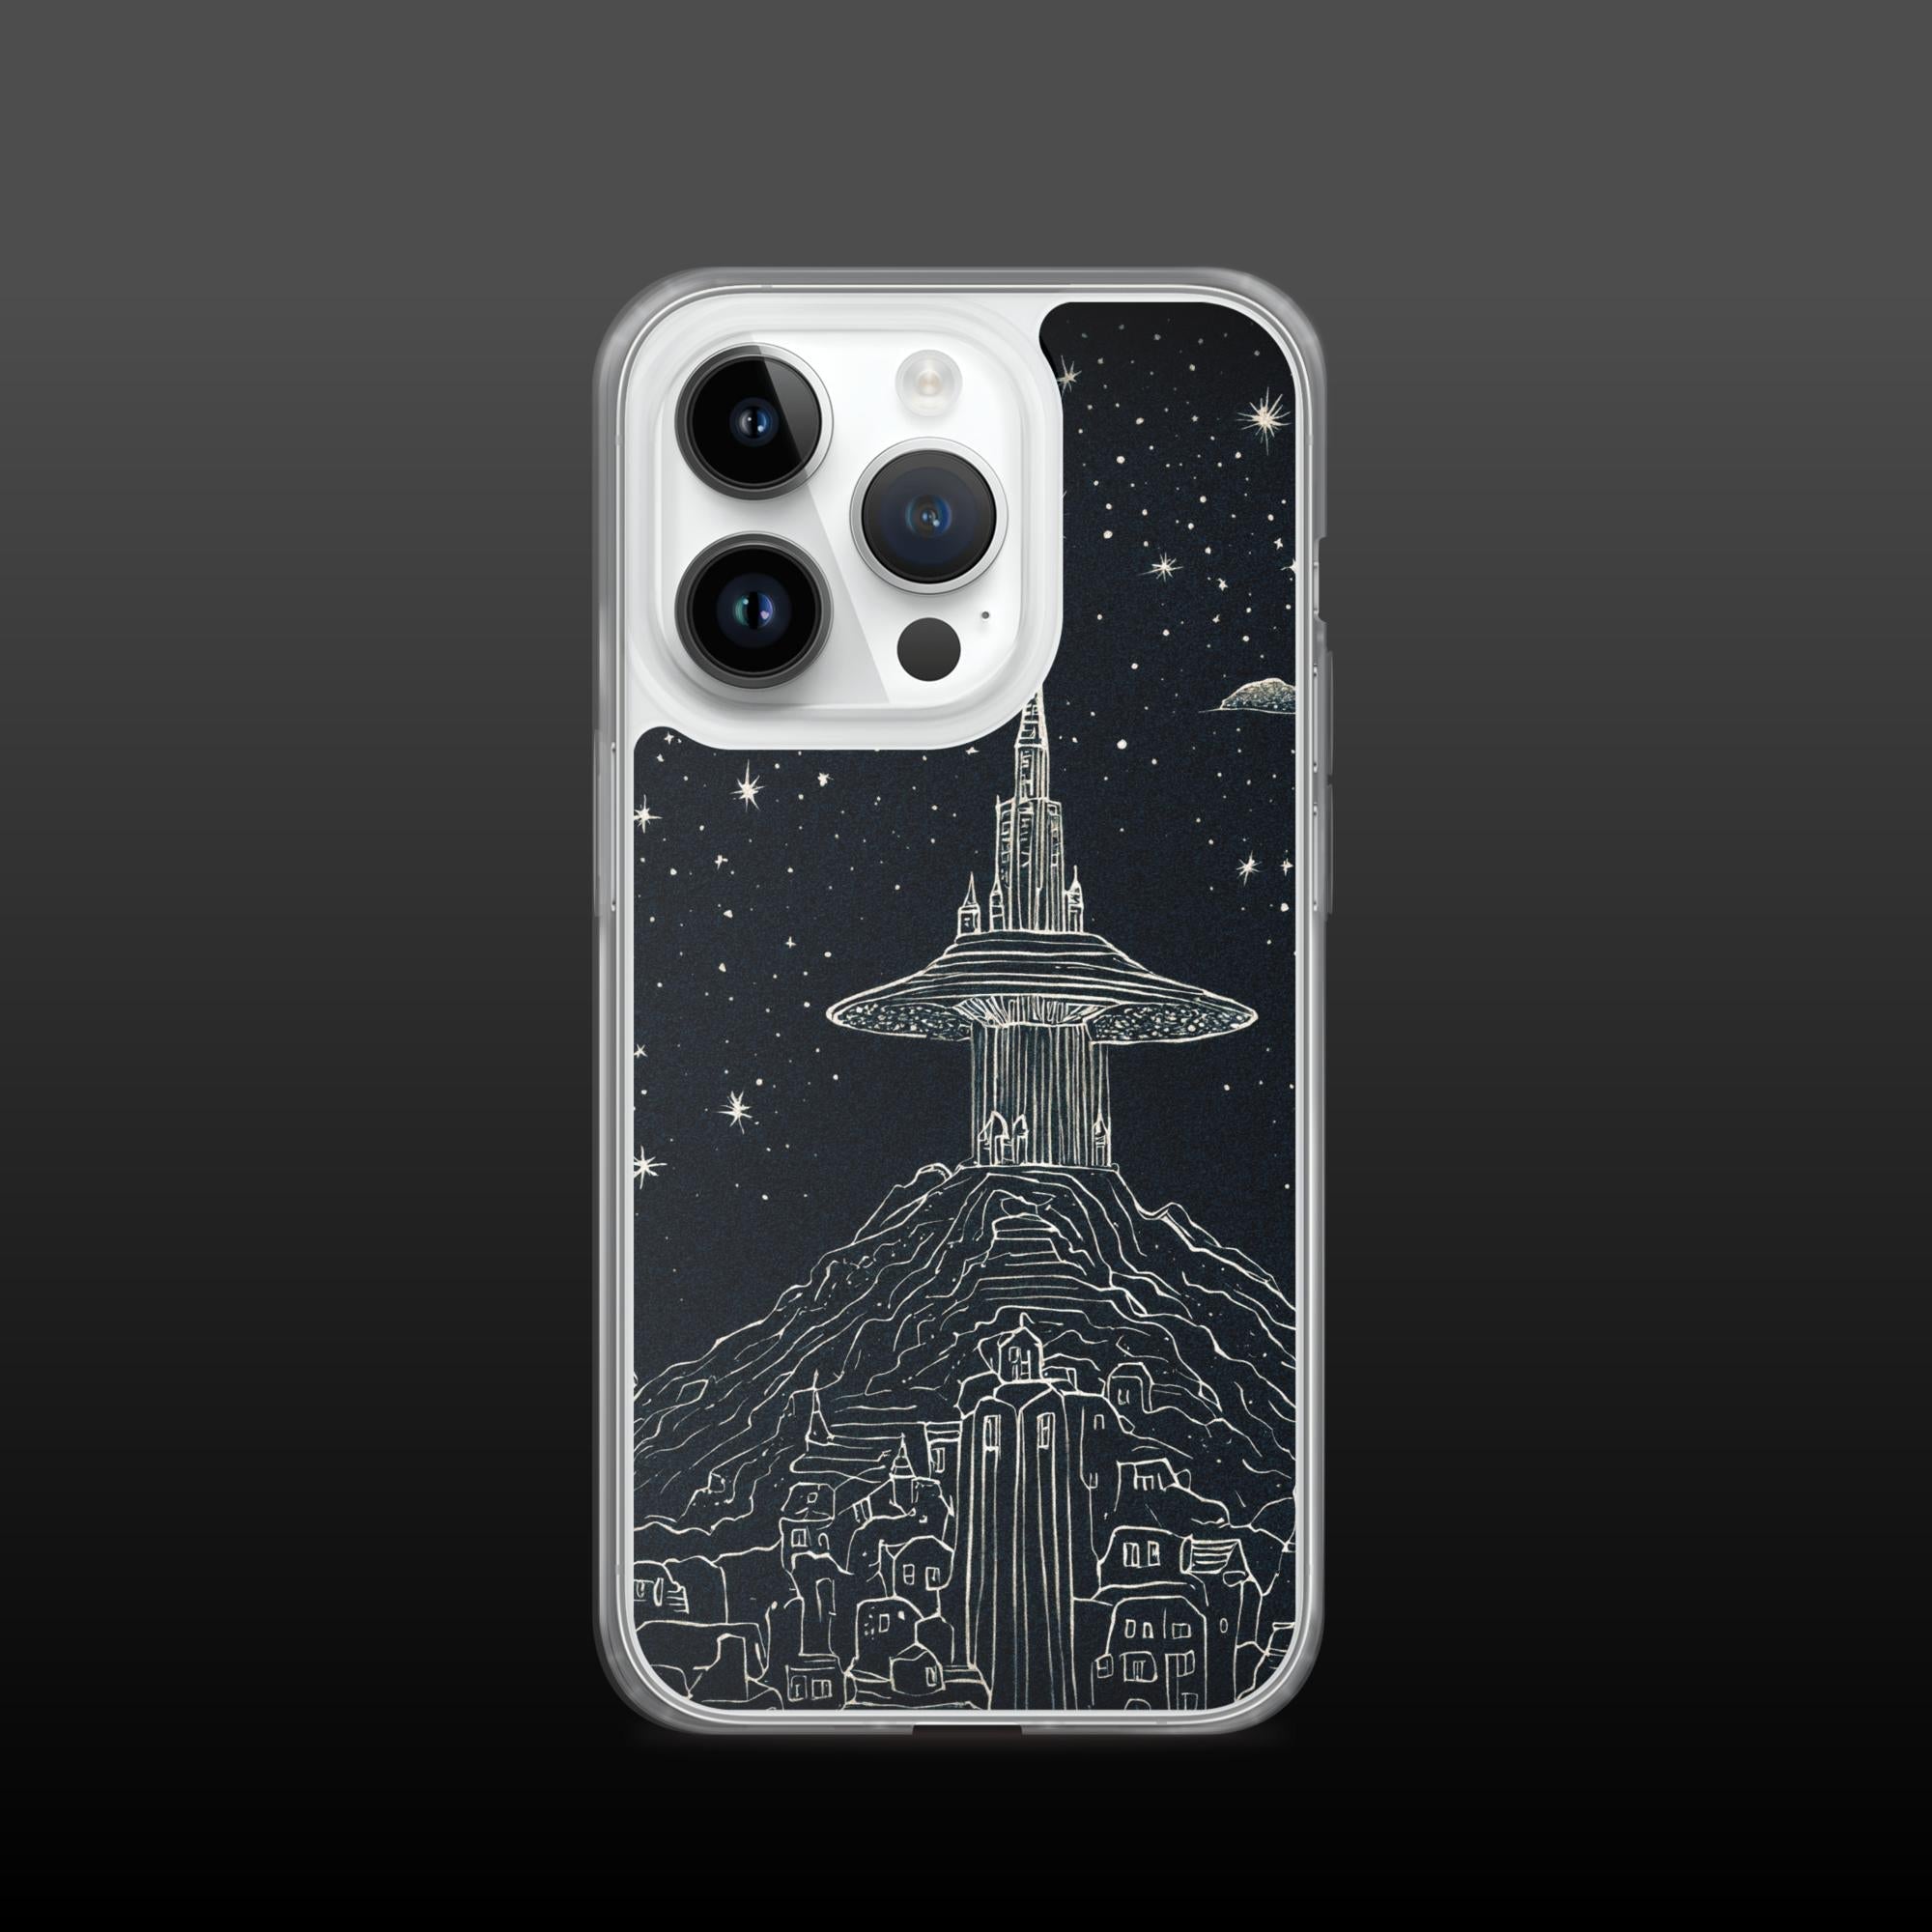 "Stary dream city" clear iphone case - Clear iphone case - Ever colorful